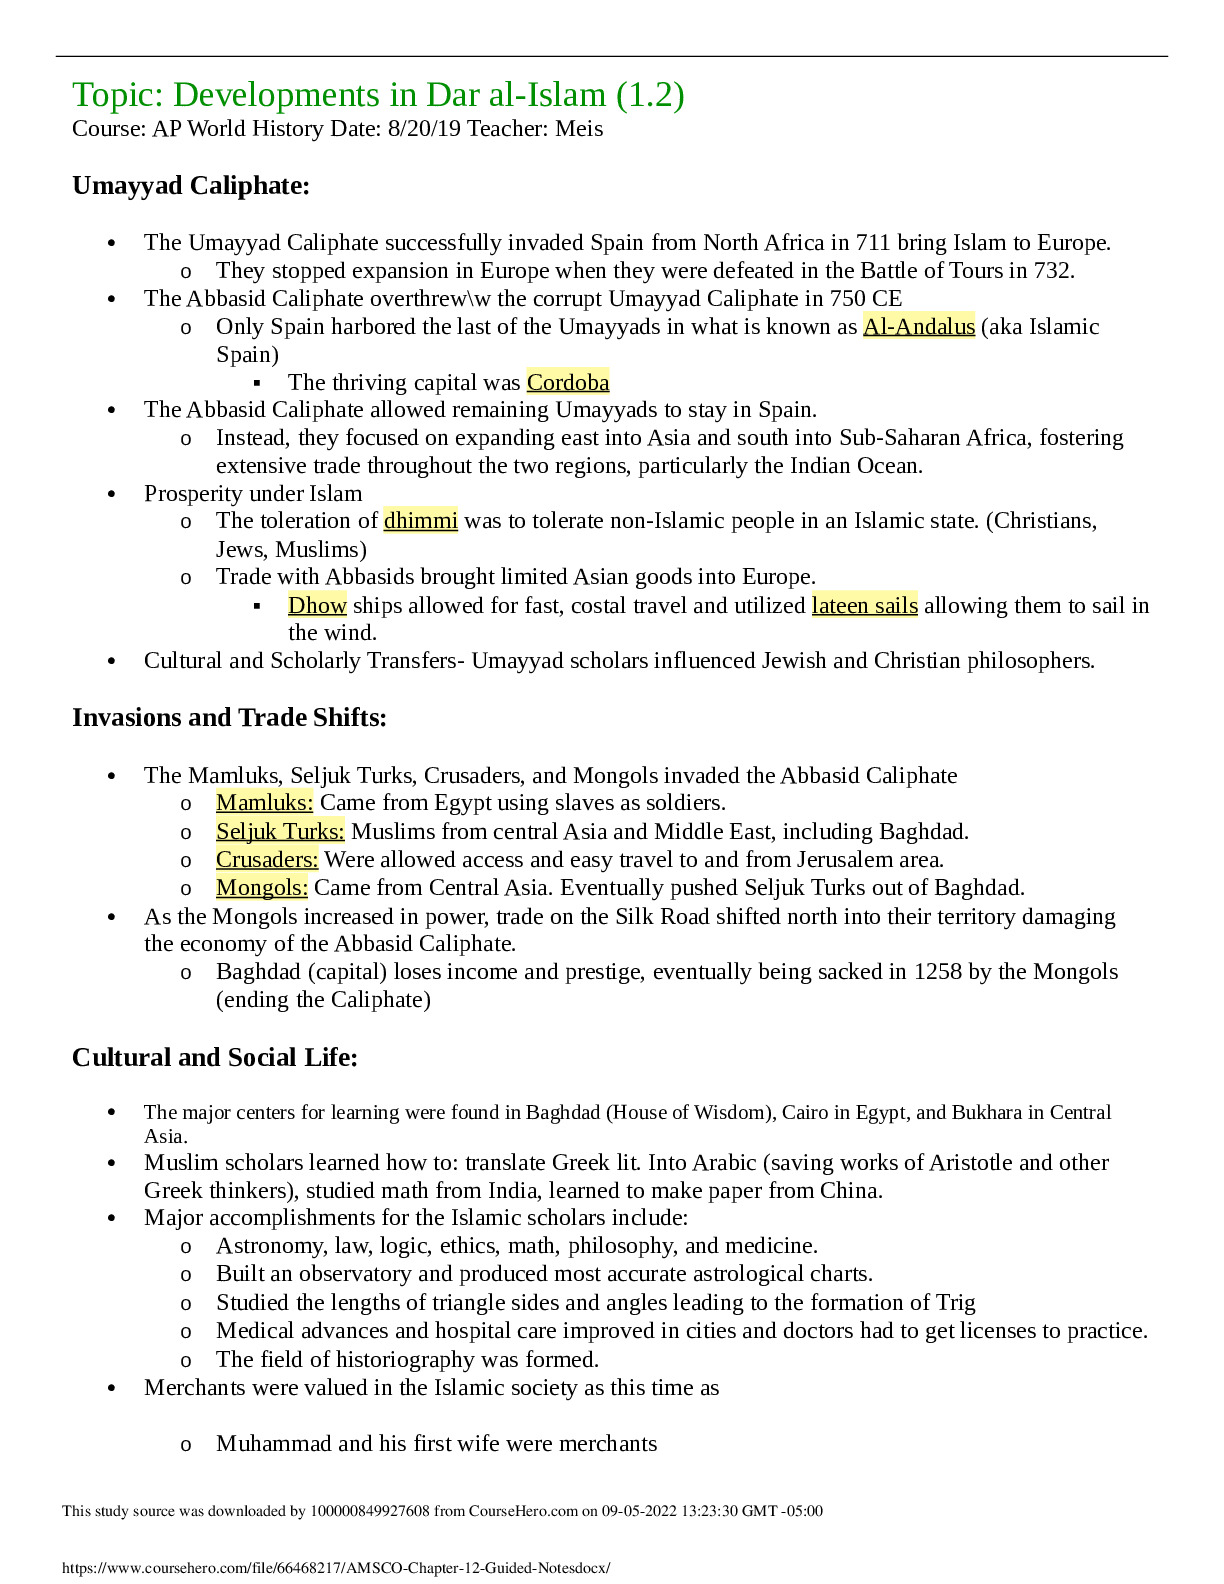 AMSCO_Chapter_1.2_Guided_Notes.docx